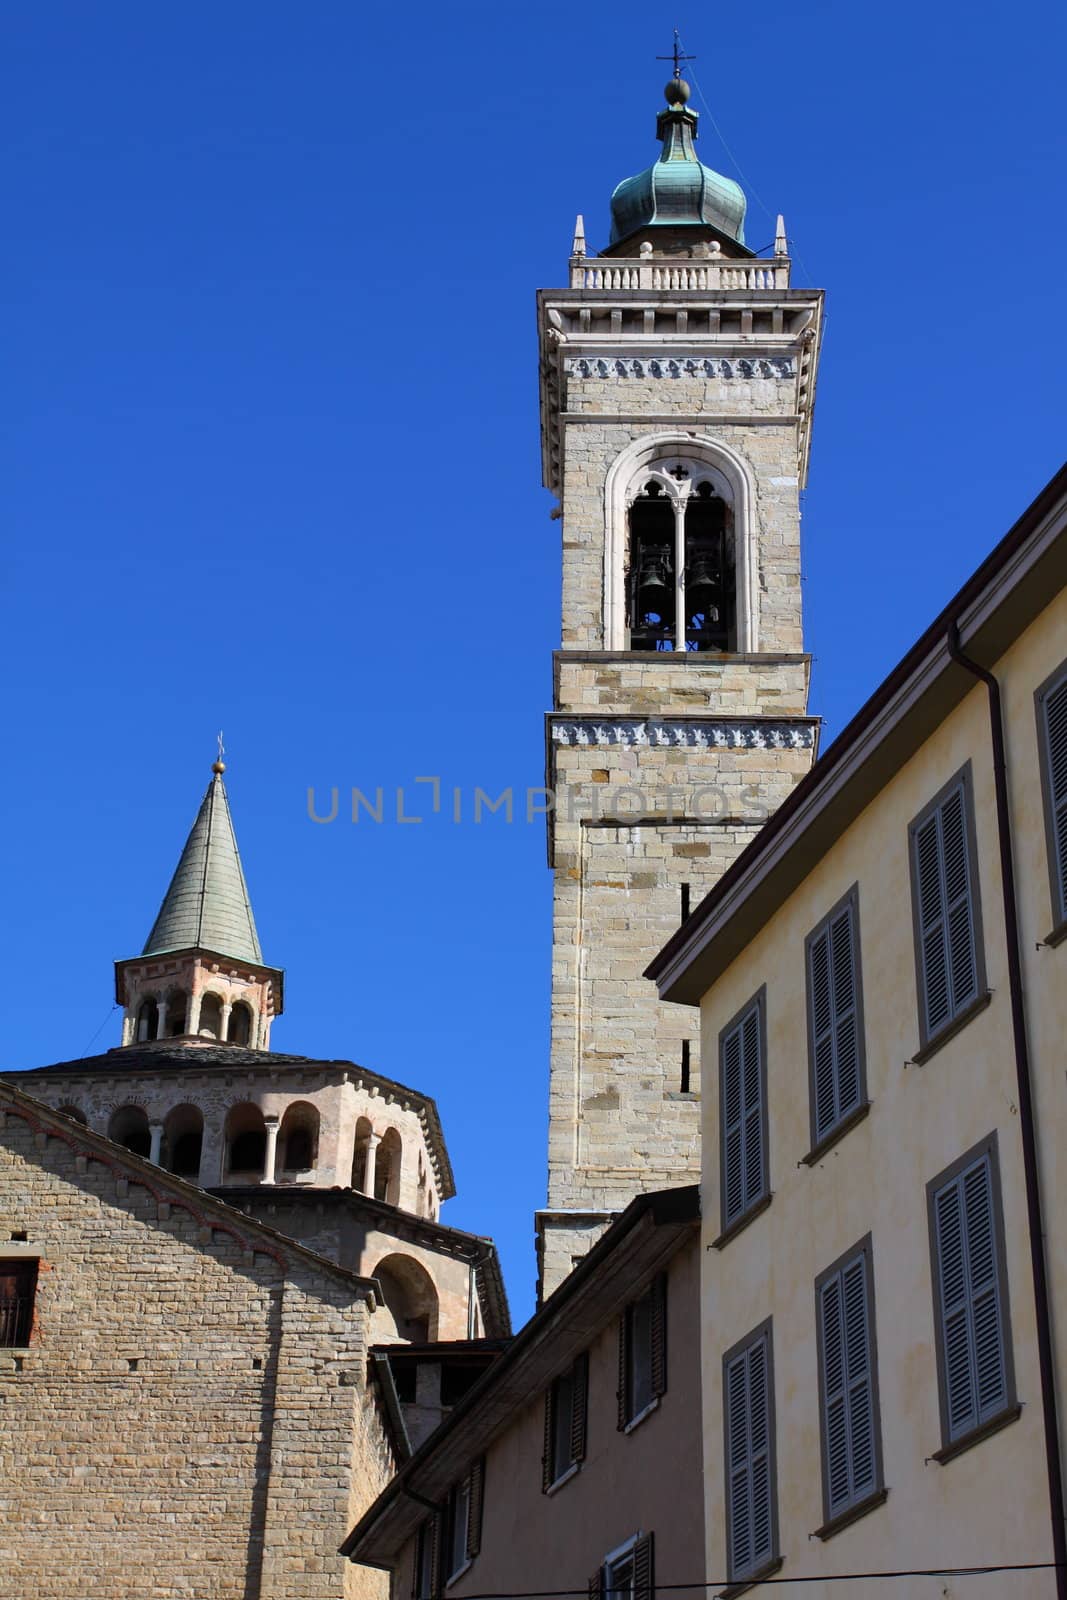 Basilica and tower bell in Bergamo, Lombardy, Italy  by mariusz_prusaczyk